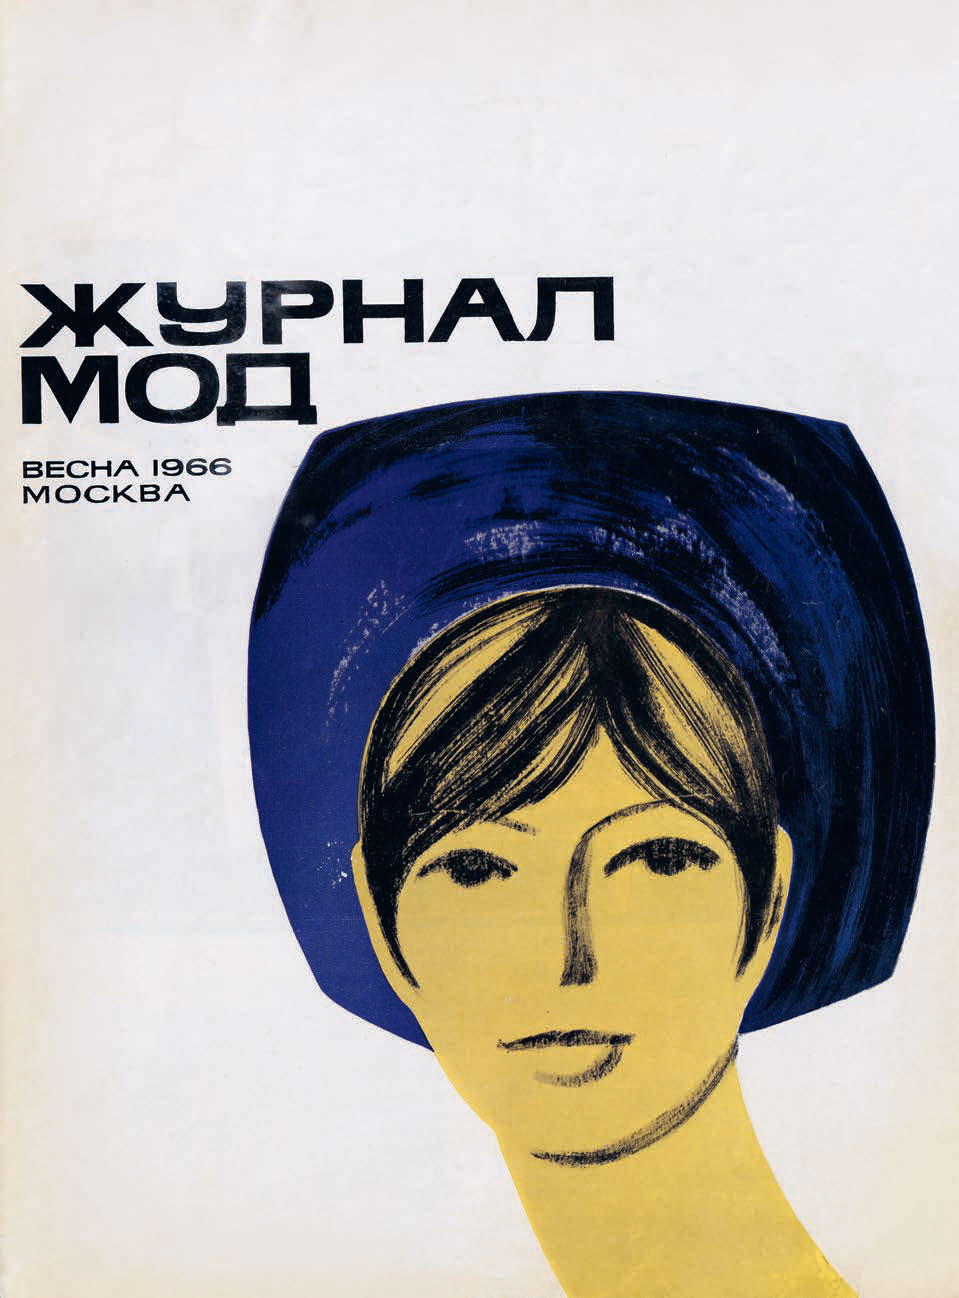 Modeli Odezhdi (Models of Clothing) magazine, 1968. As reproduced in Designed in the USSR